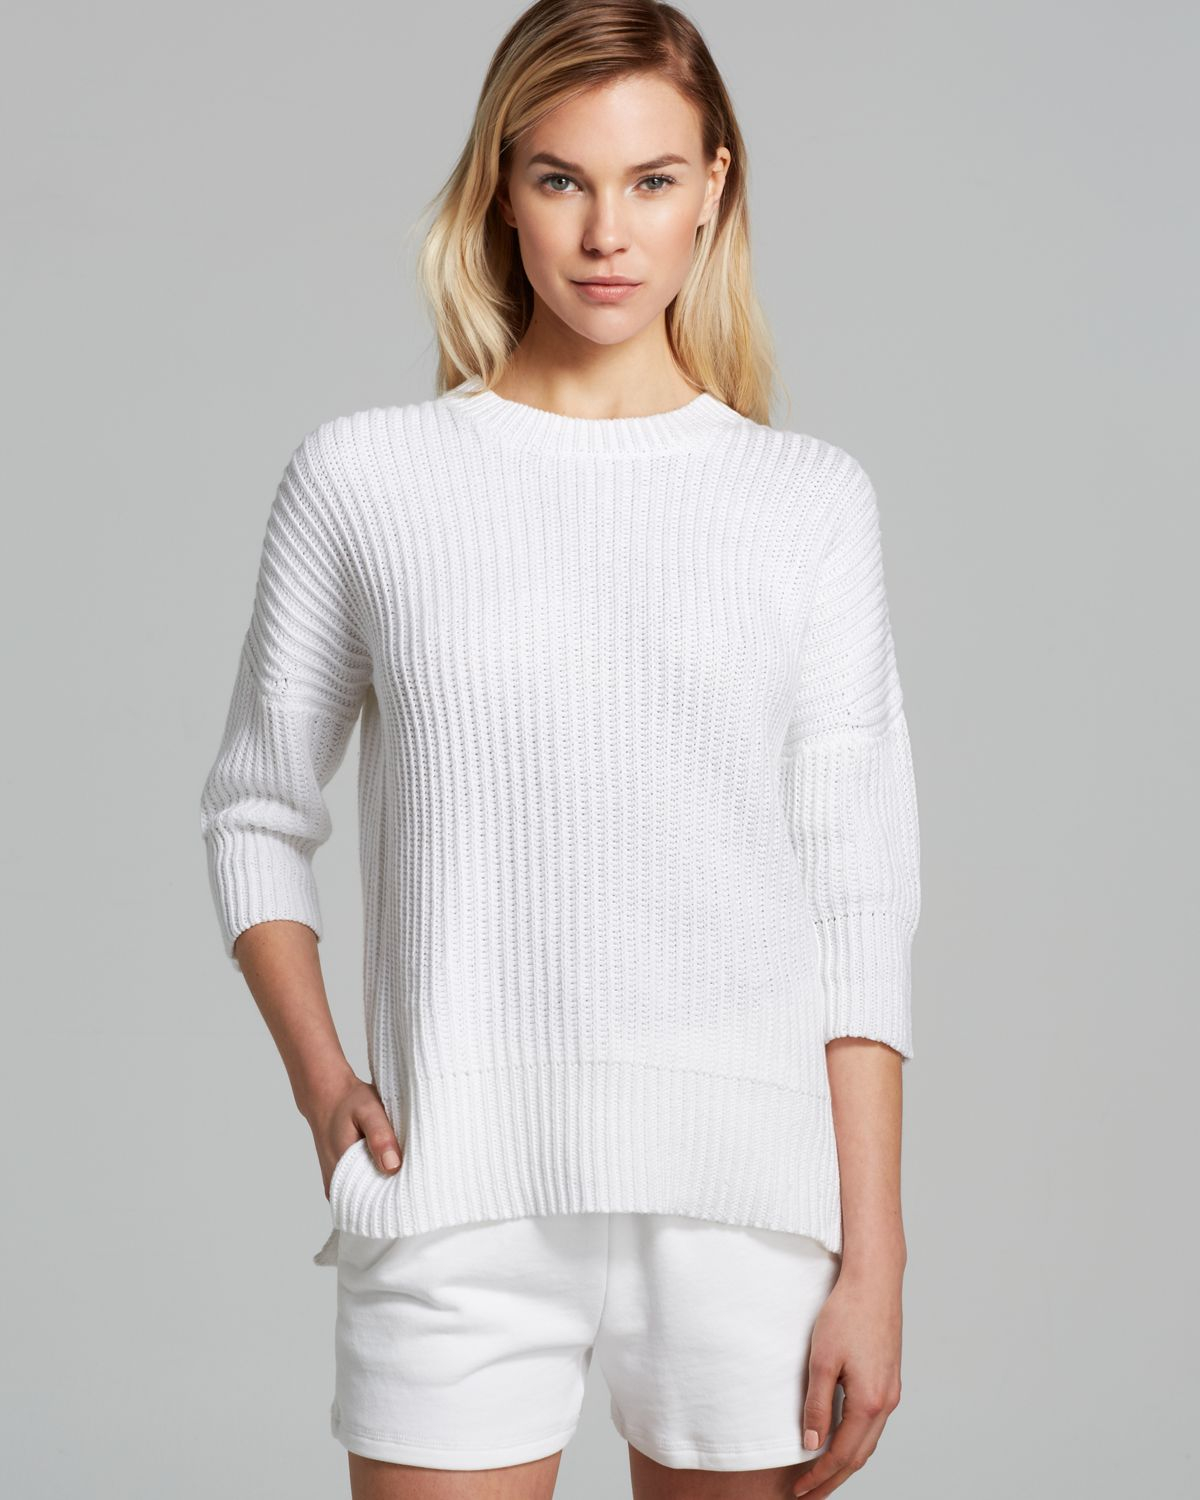 Lyst - Theory Pullover Sweater Hesterly Calming in White